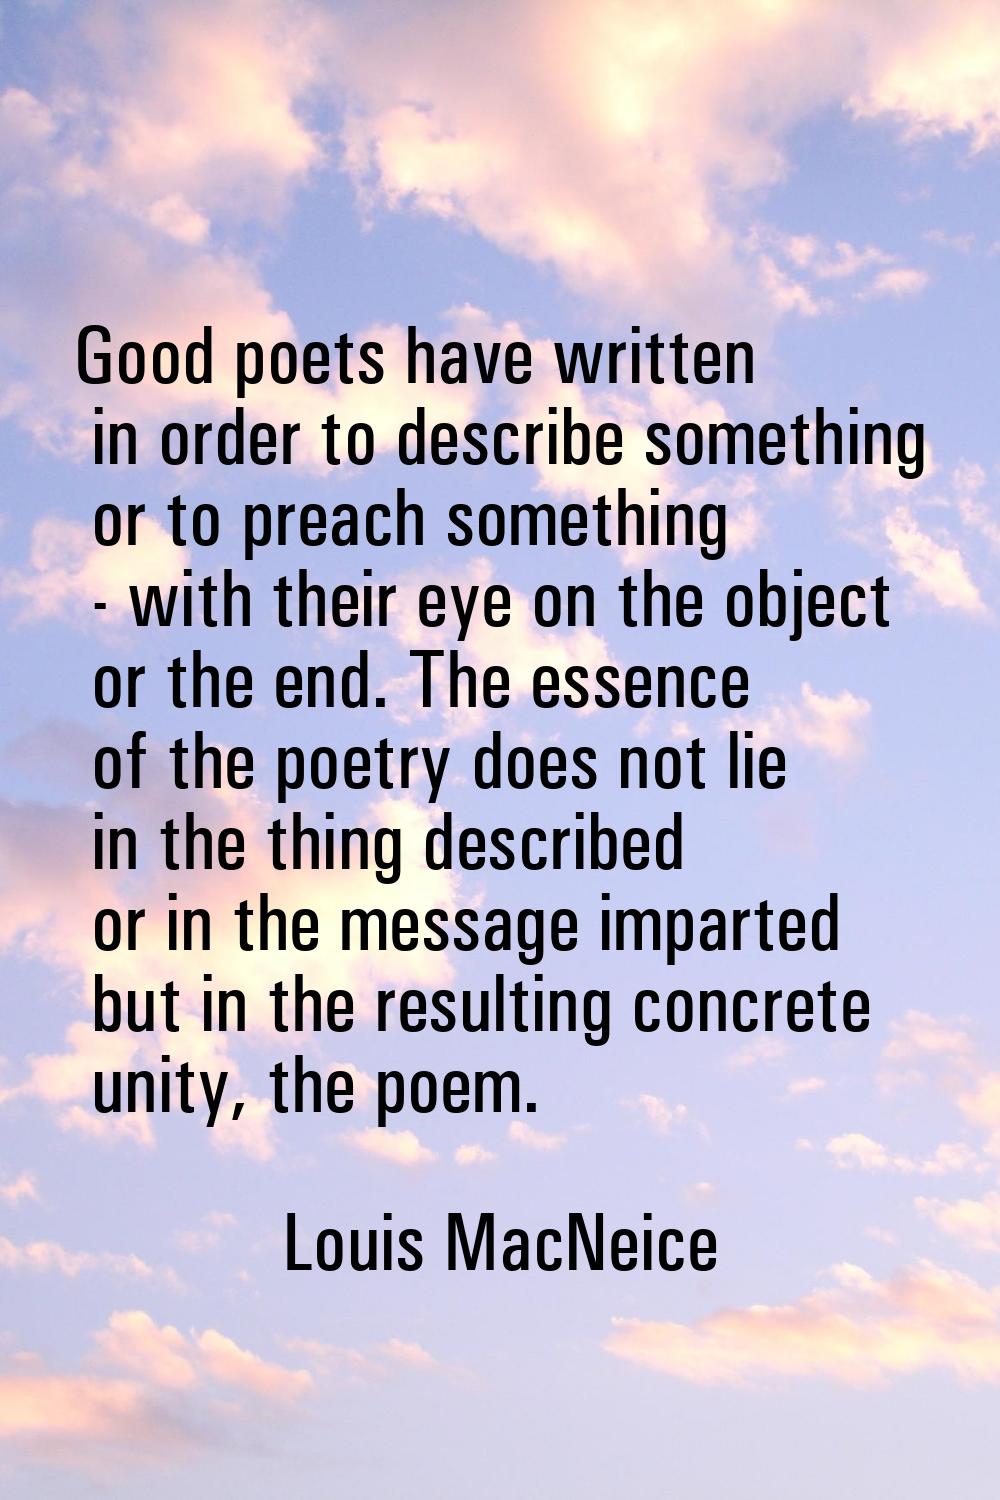 Good poets have written in order to describe something or to preach something - with their eye on t